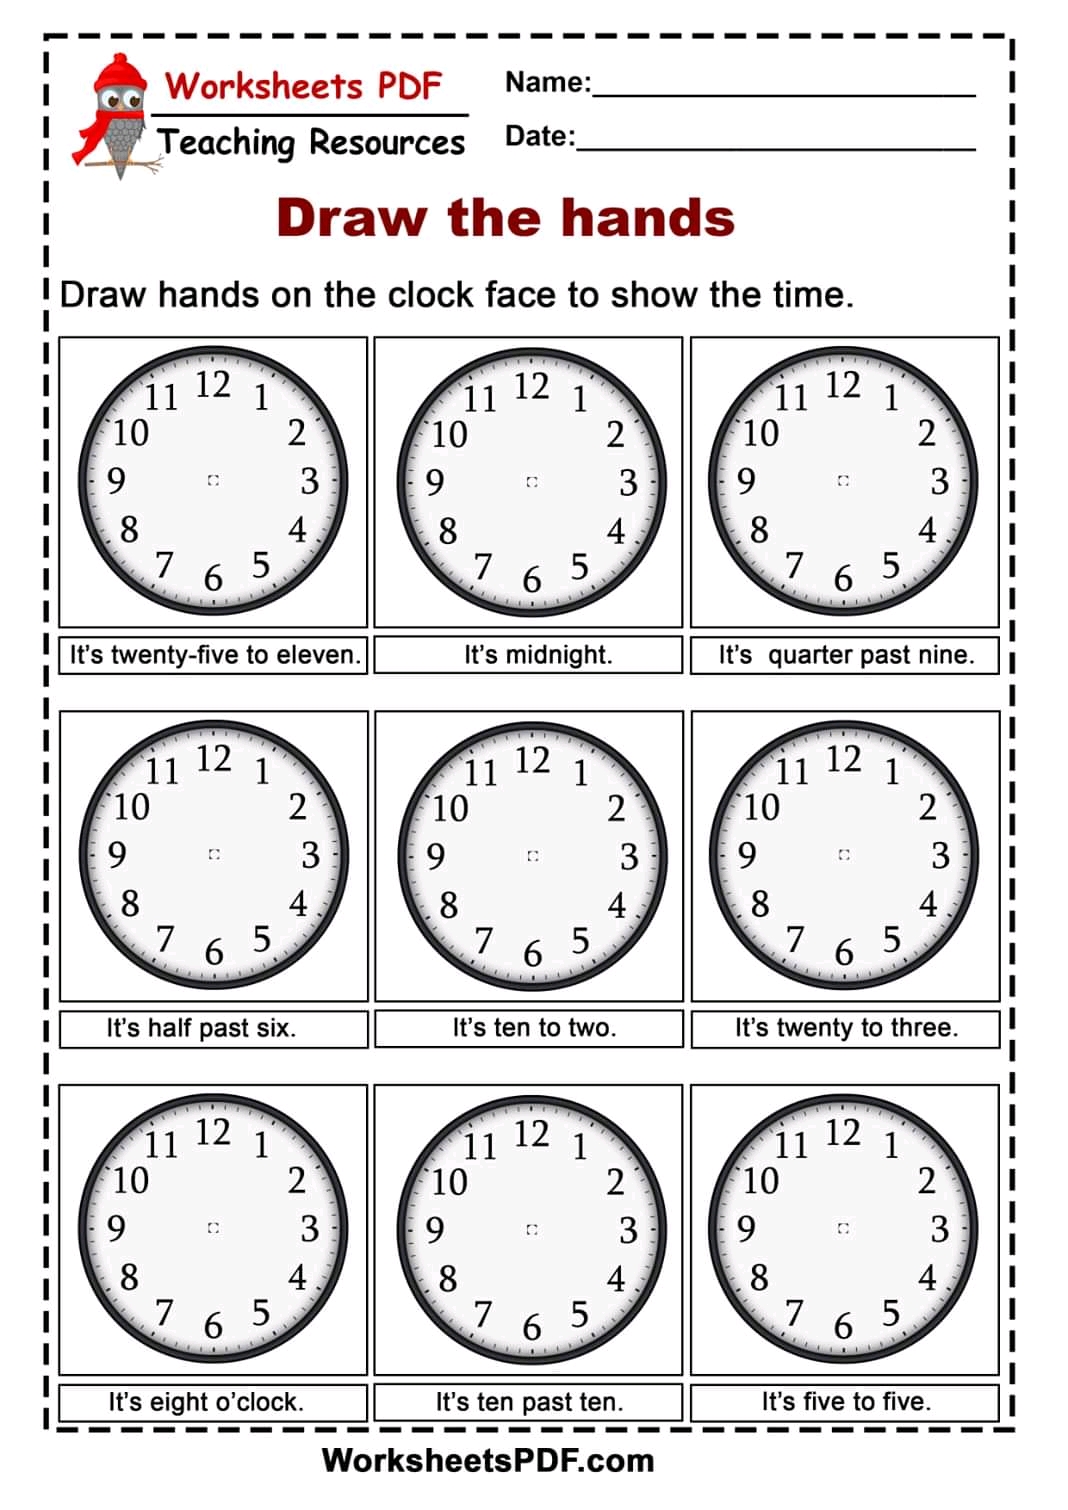 How to tell time. Telling the time Worksheets ответы. Telling the time Worksheets for Kids. Часы Worksheets. Время Worksheets.